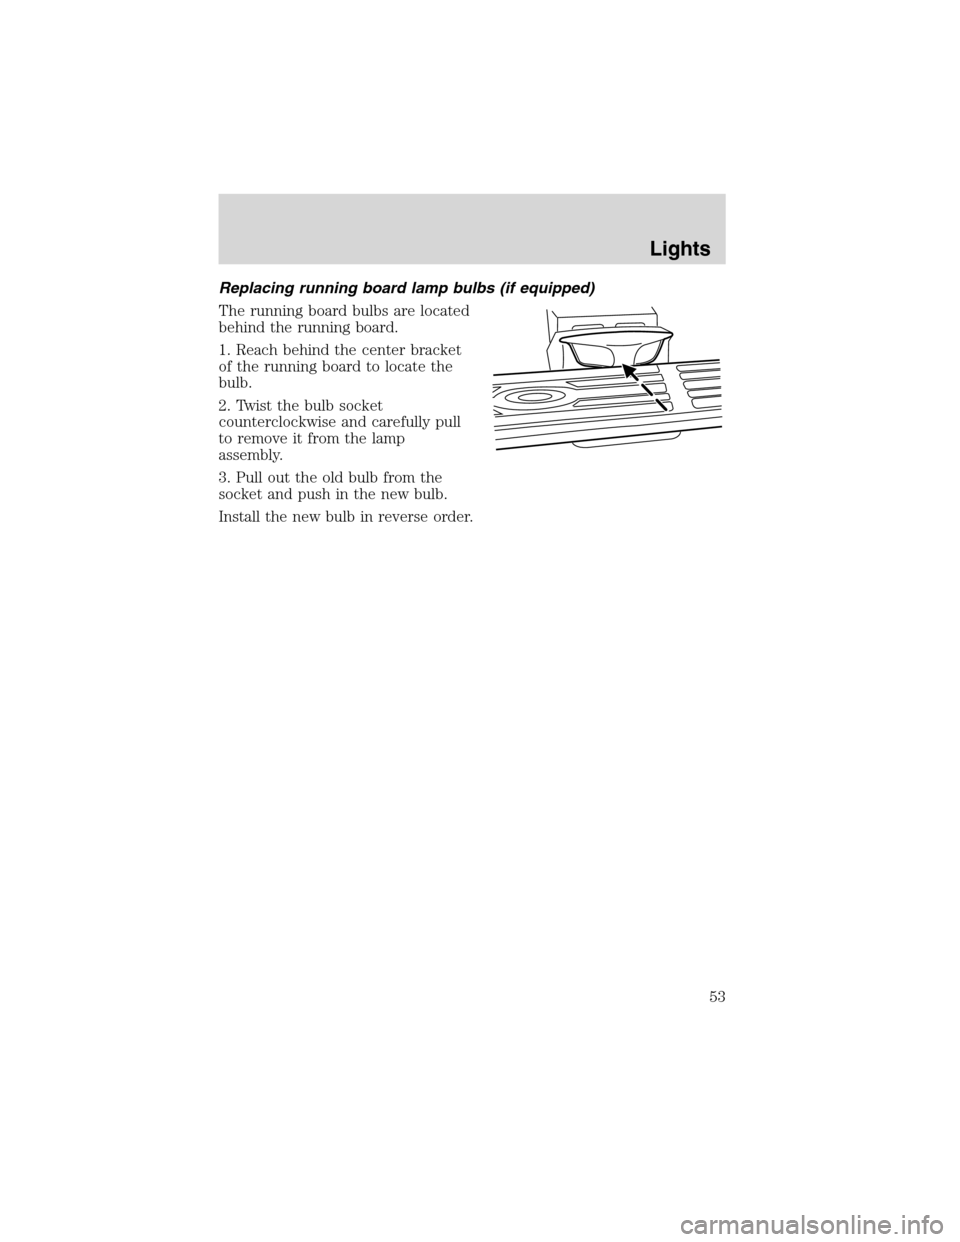 LINCOLN BLACKWOOD 2003 Workshop Manual Replacing running board lamp bulbs (if equipped)
The running board bulbs are located
behind the running board.
1. Reach behind the center bracket
of the running board to locate the
bulb.
2. Twist the 